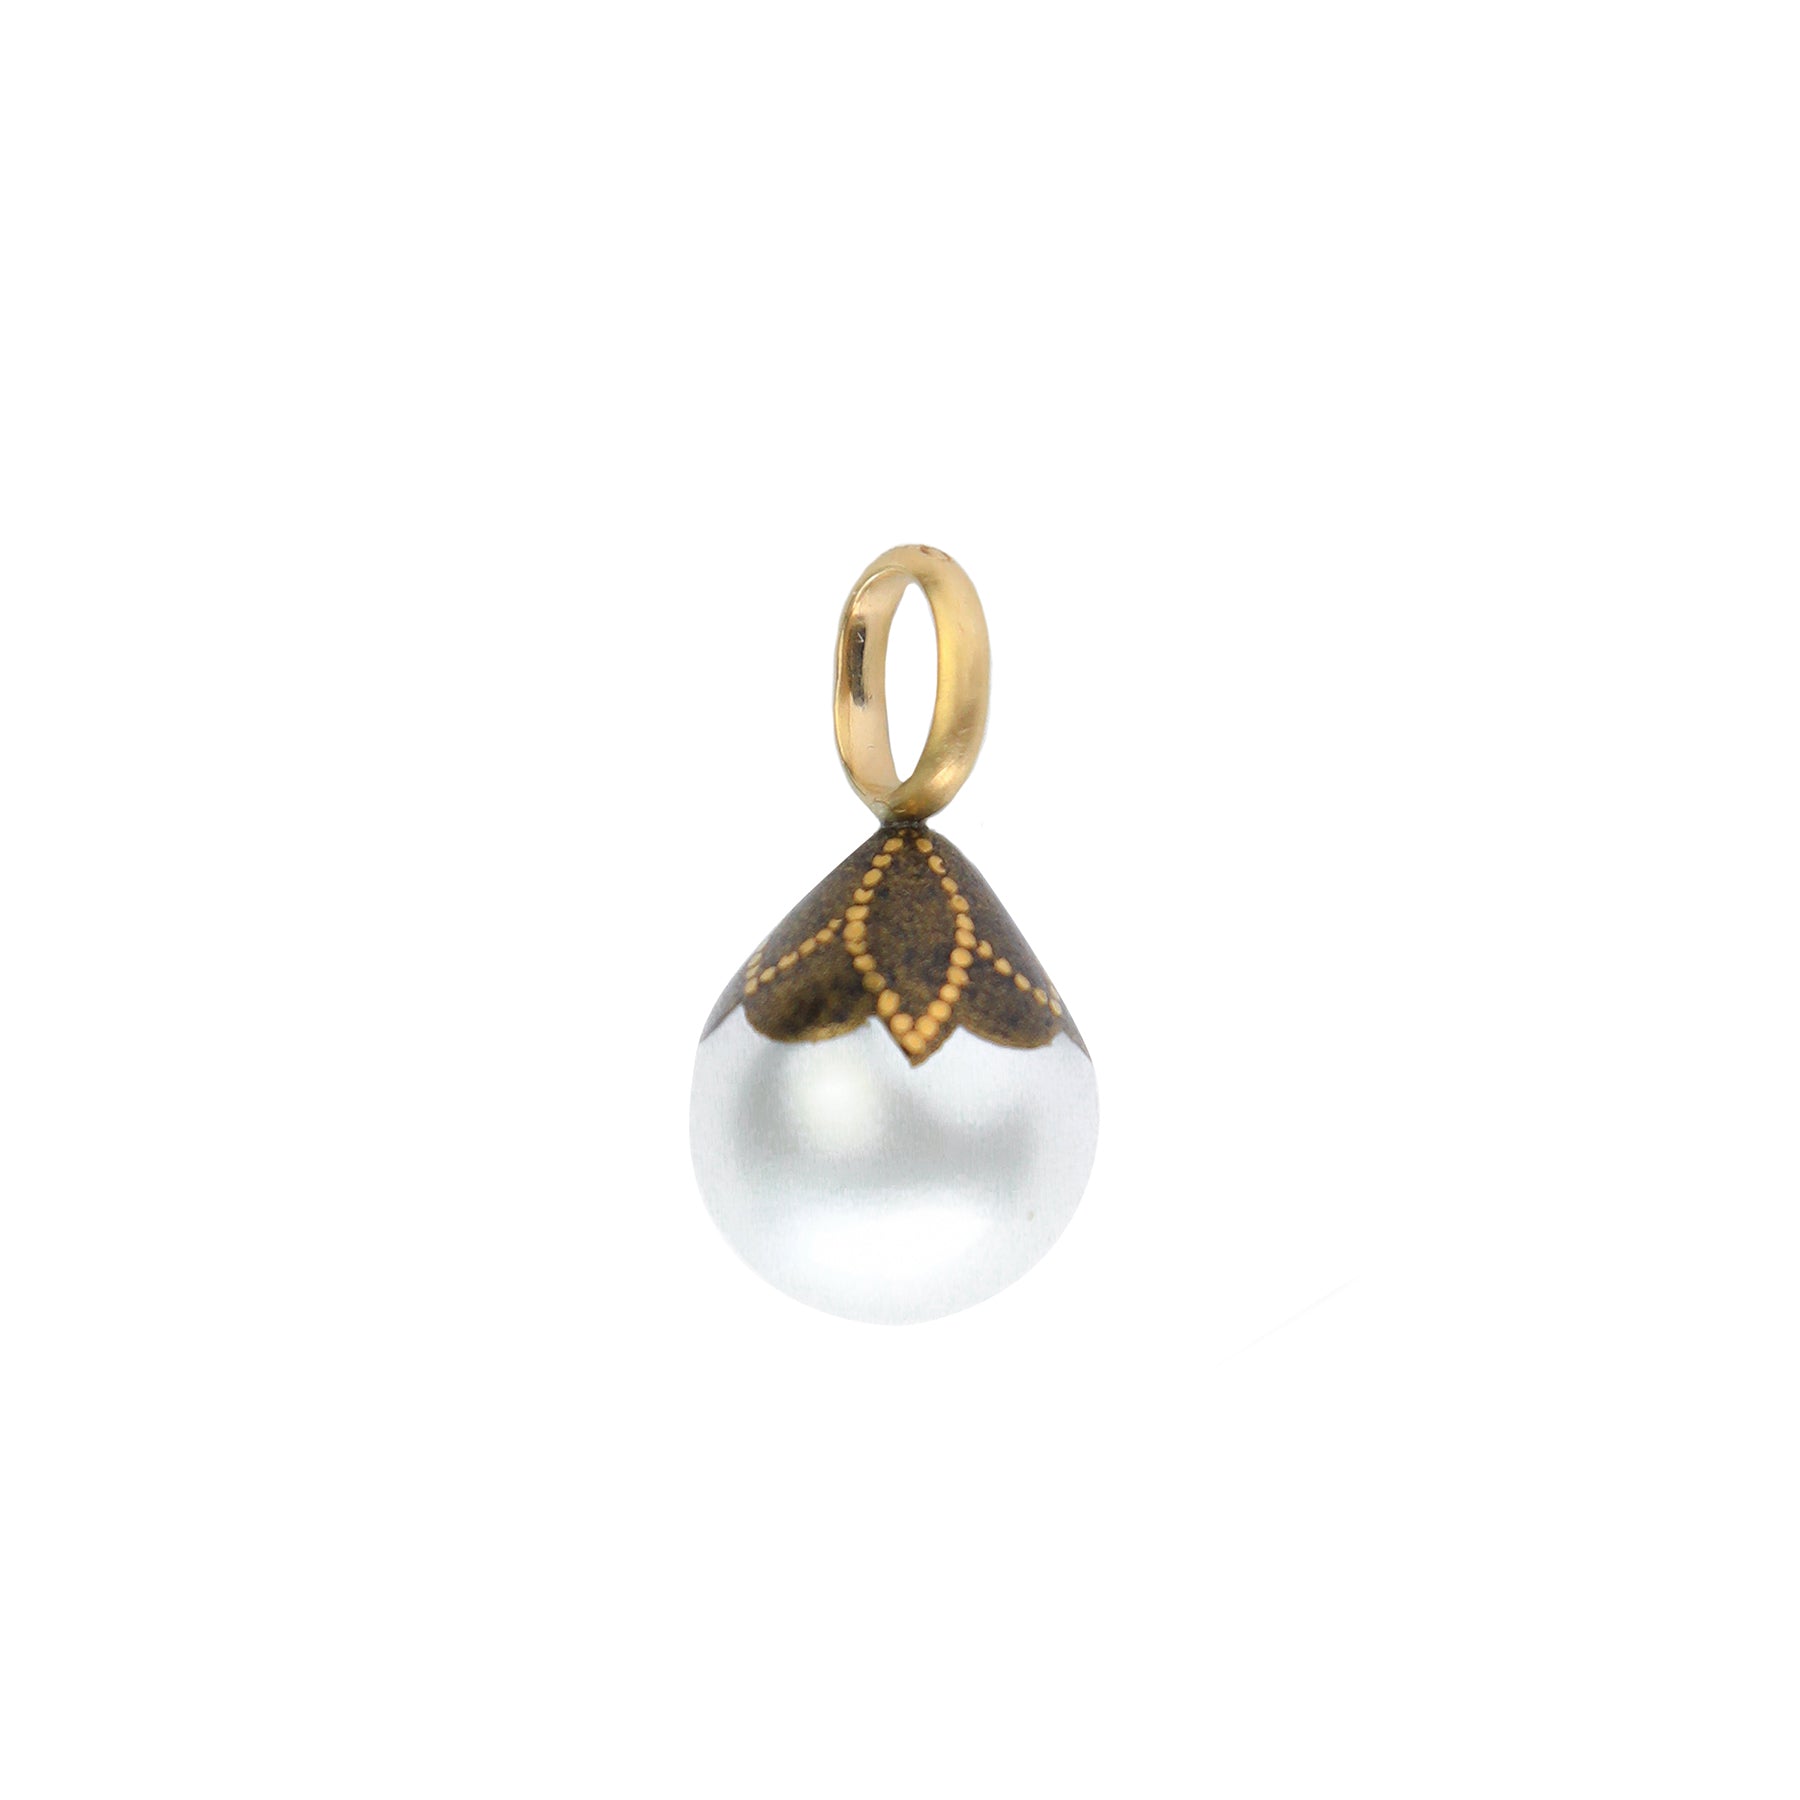 One-of-a-kind Painted Pearl, 18k